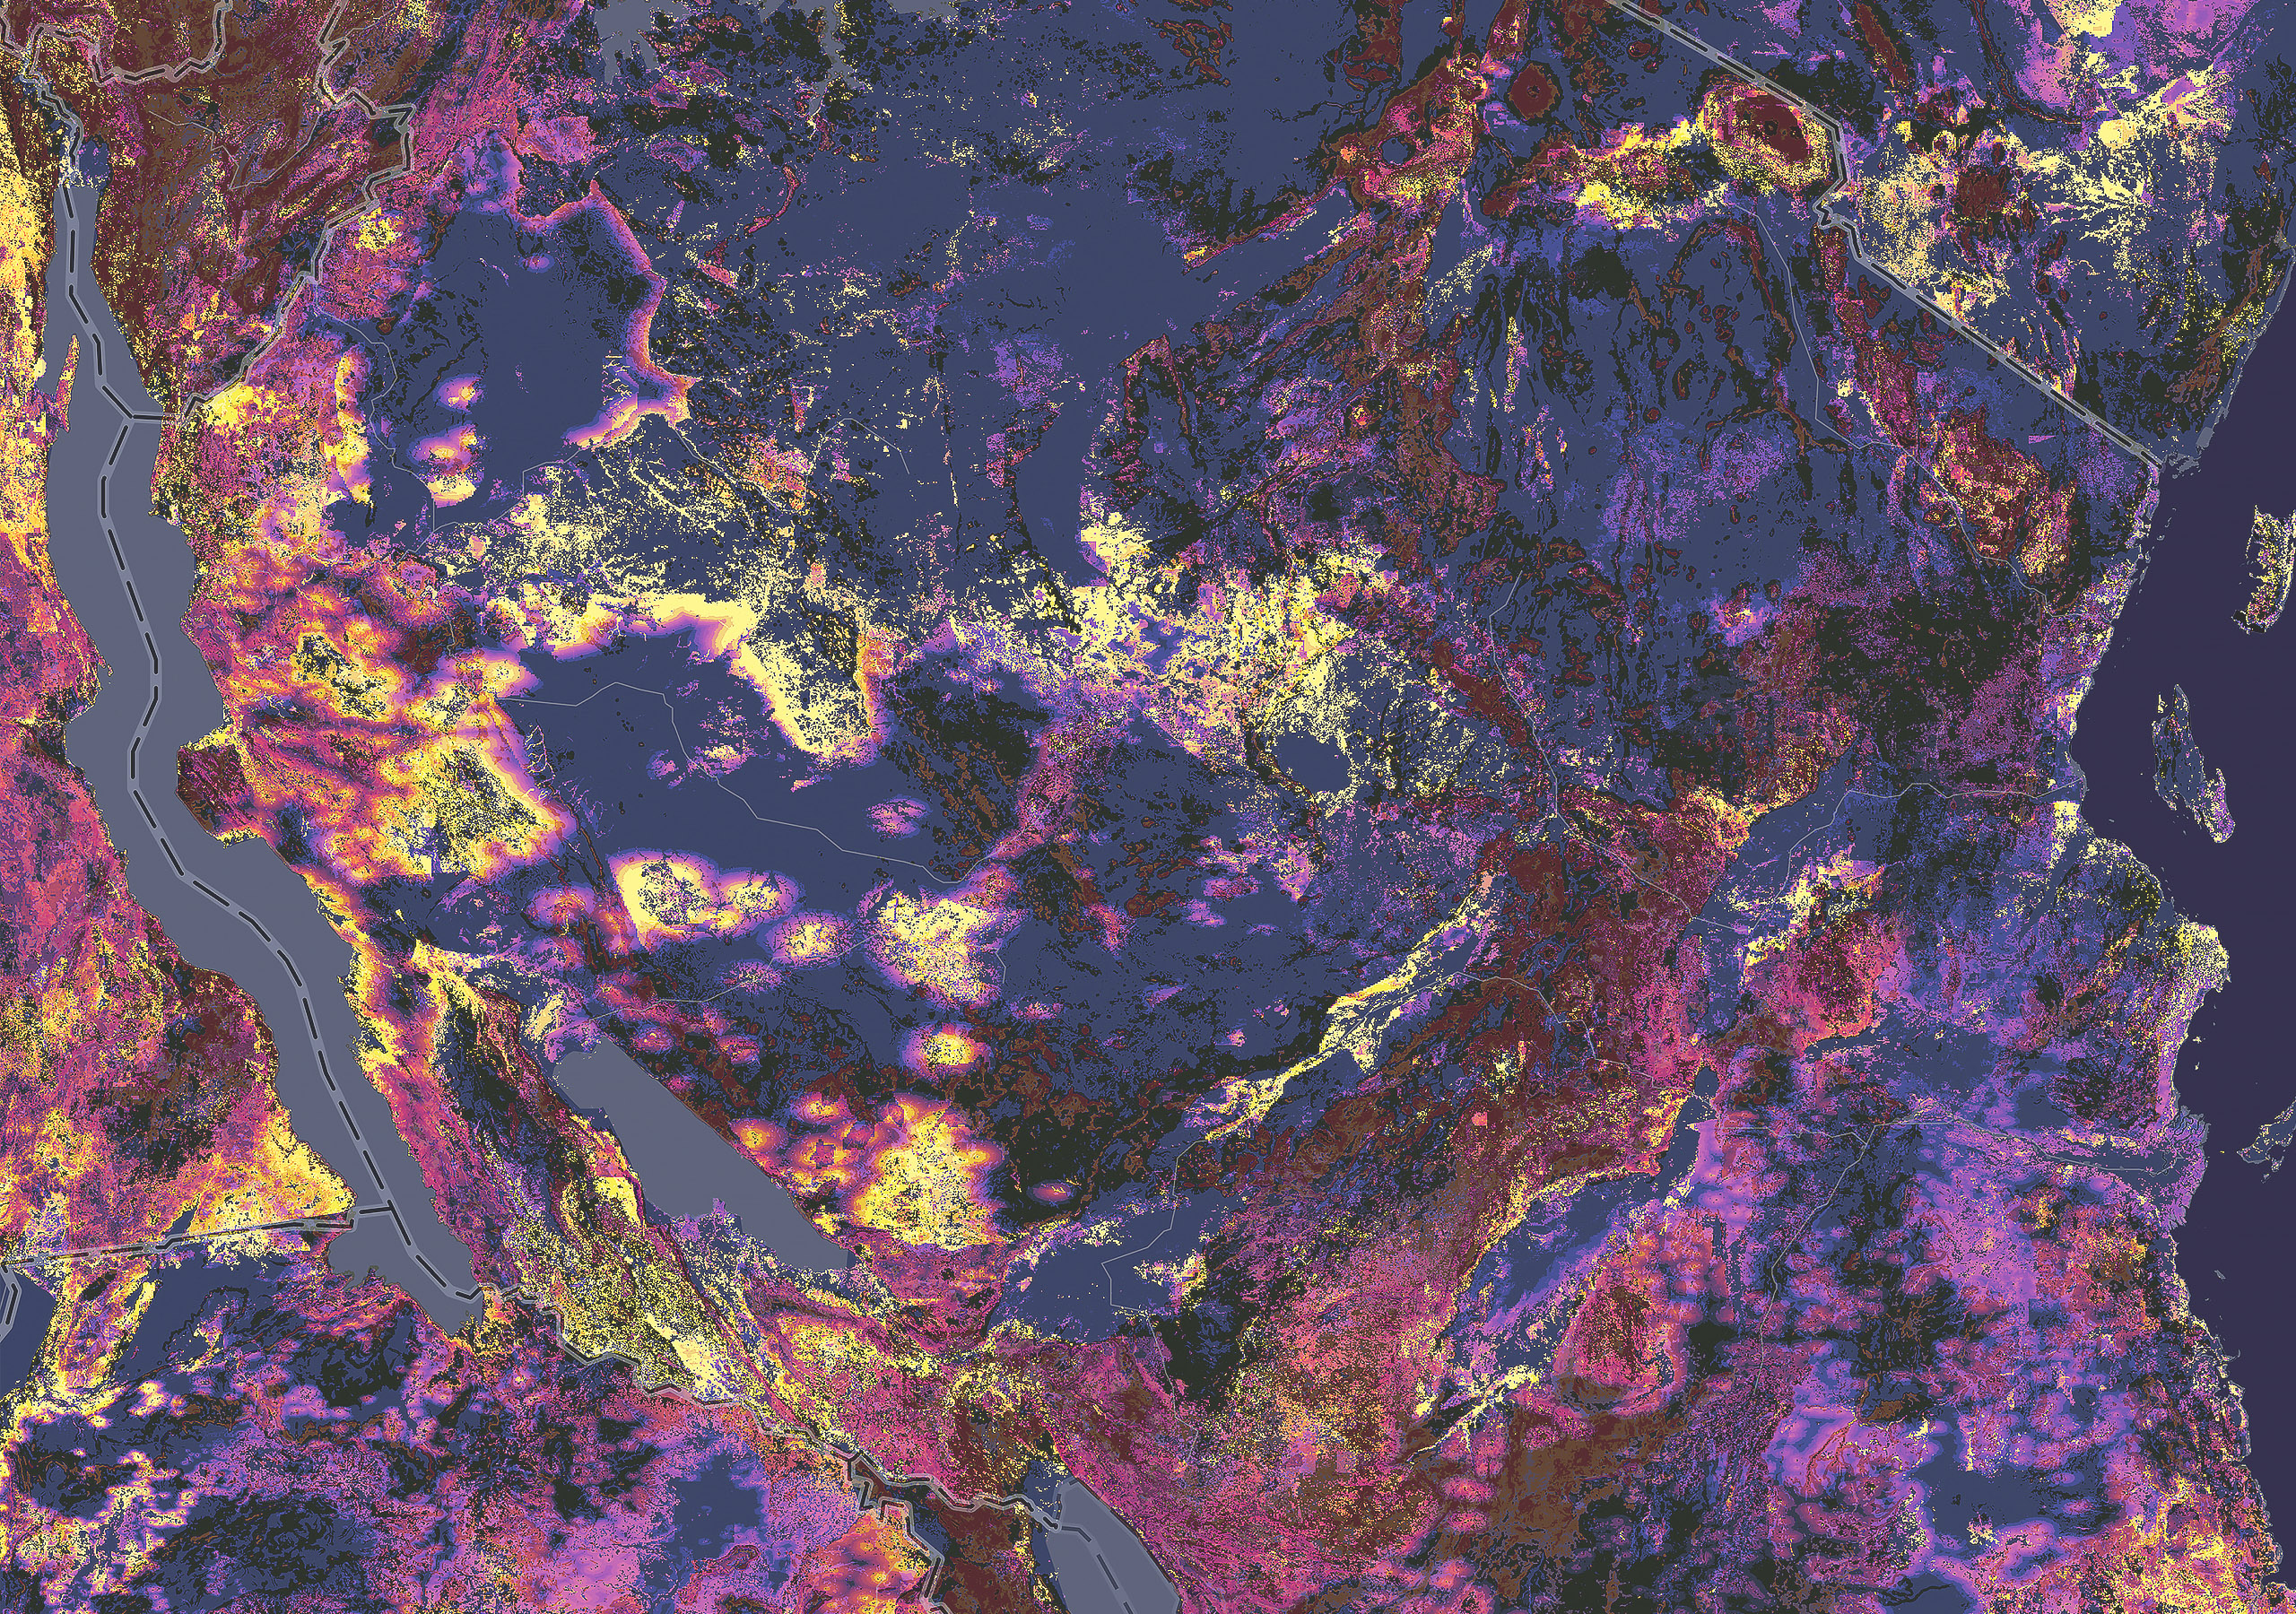 A map of a coastline shows remote sensing data about nearby terrain in shades of purple, brown, maroon, pink, and yellow